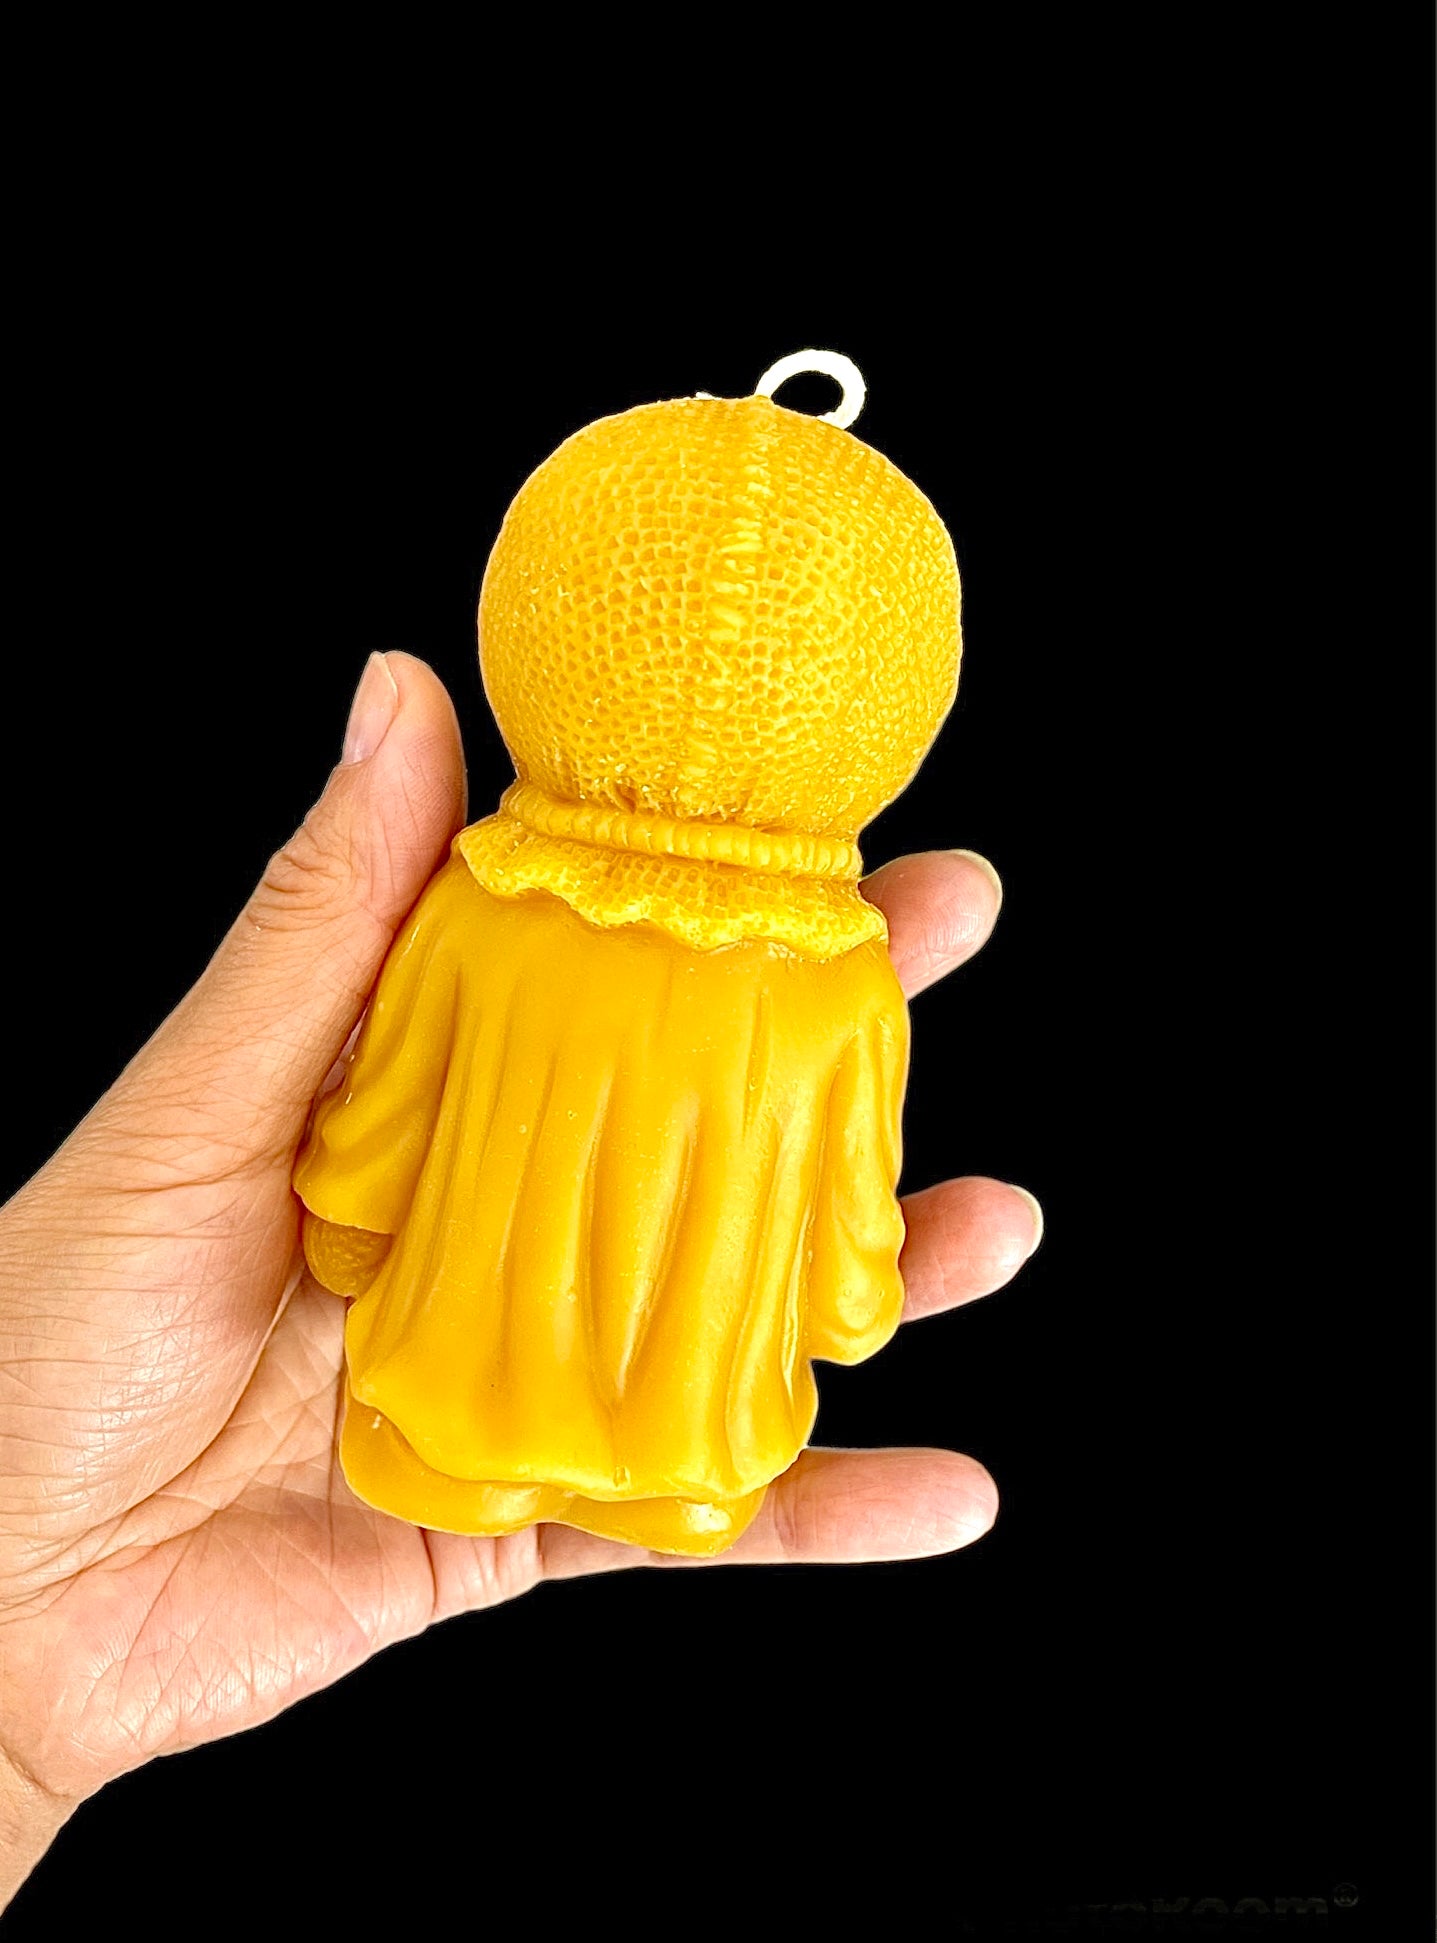 4.5” 3D Silicone mold - trick or treat Sam figure - Halloween figure mold - candle soap mold - resin ornament mold